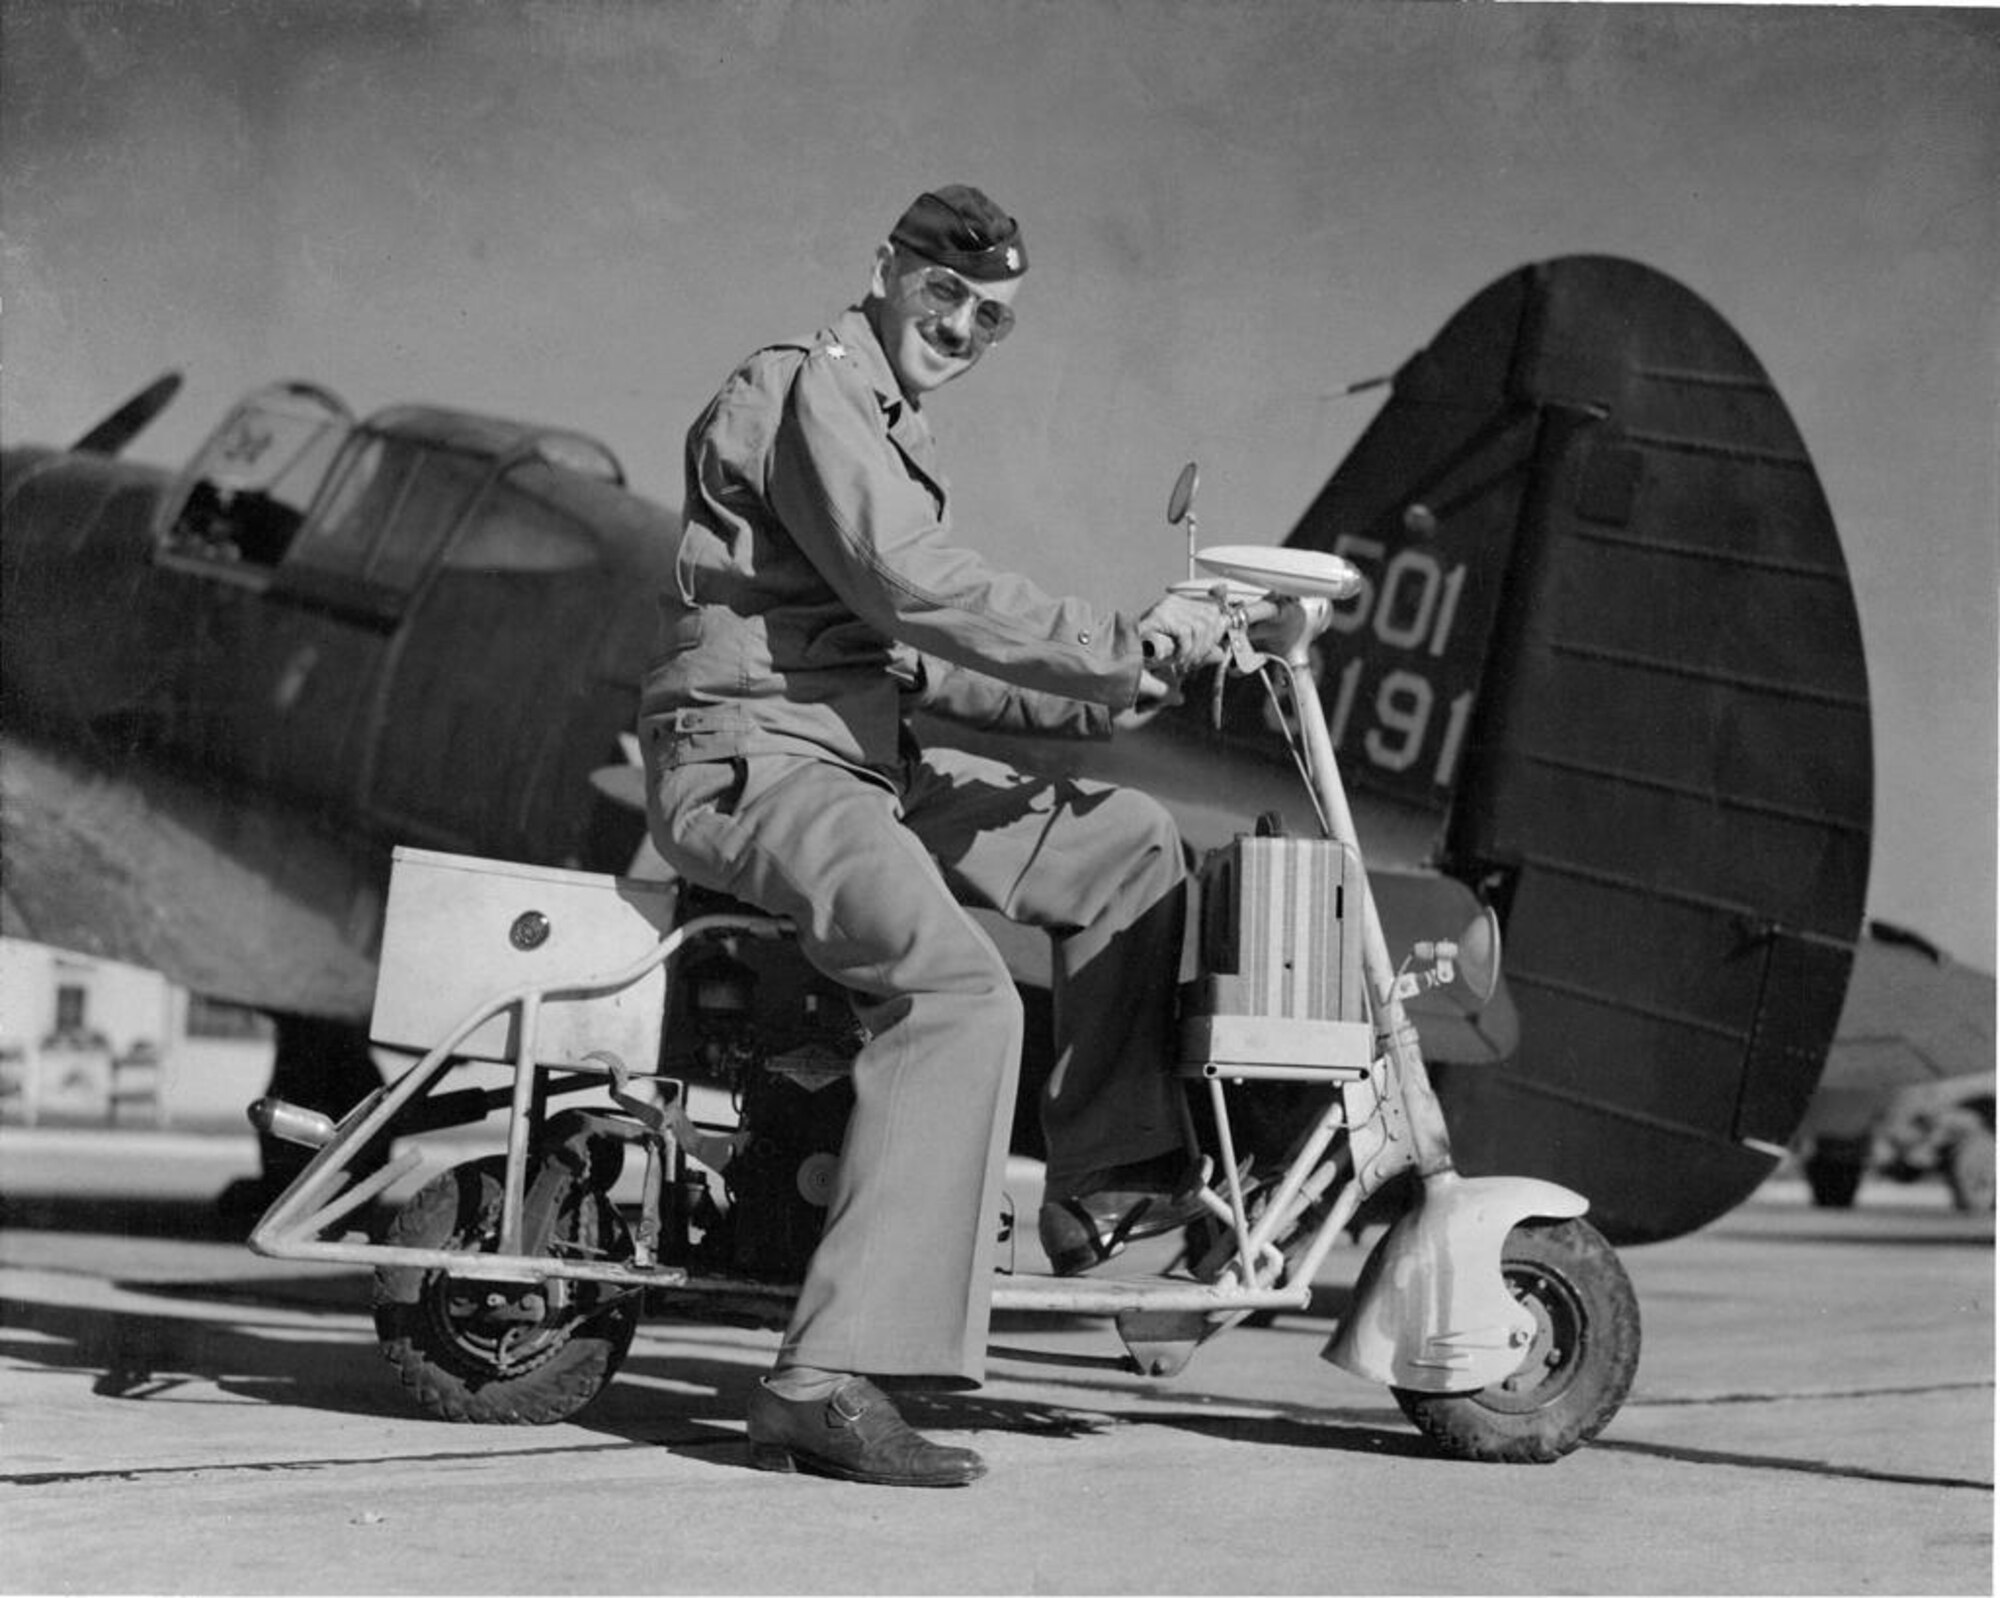 U.S. Air Force 1st Lt. Chad Chapman's great-grandfather, retired Lt. Col. William "Bill" Chapman poses on a motorbike in front of a p-36 Hawk. (U.S. Air Force courtesy photo)